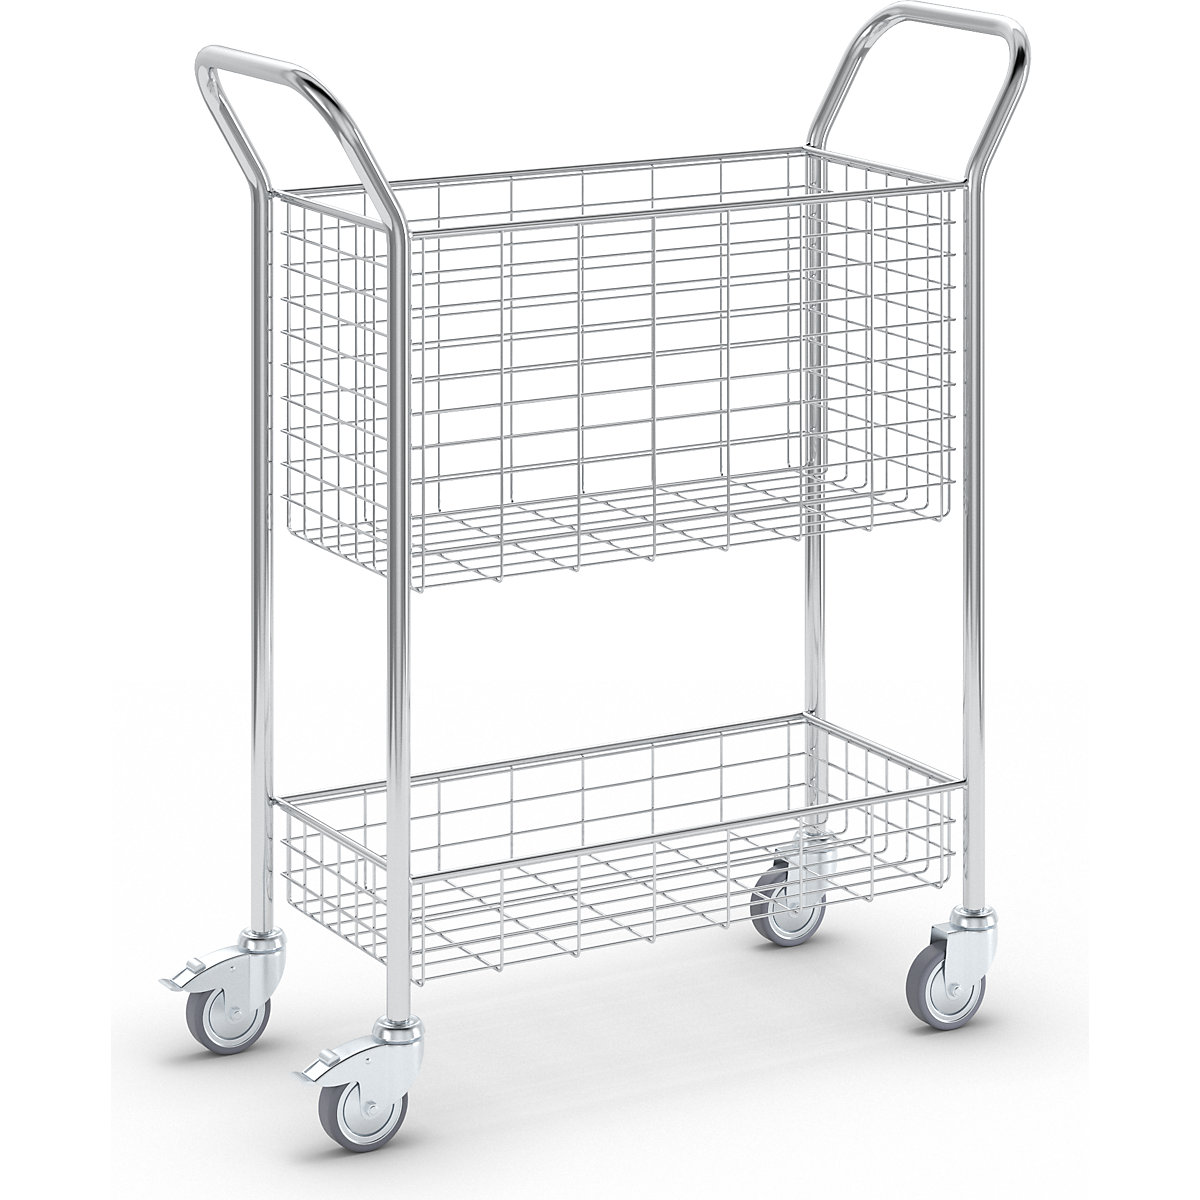 Office and mail distribution trolley – eurokraft pro, max. load 200 kg, white aluminium, LxWxH 1005 x 380 x 1245 mm, 2 shelves-13